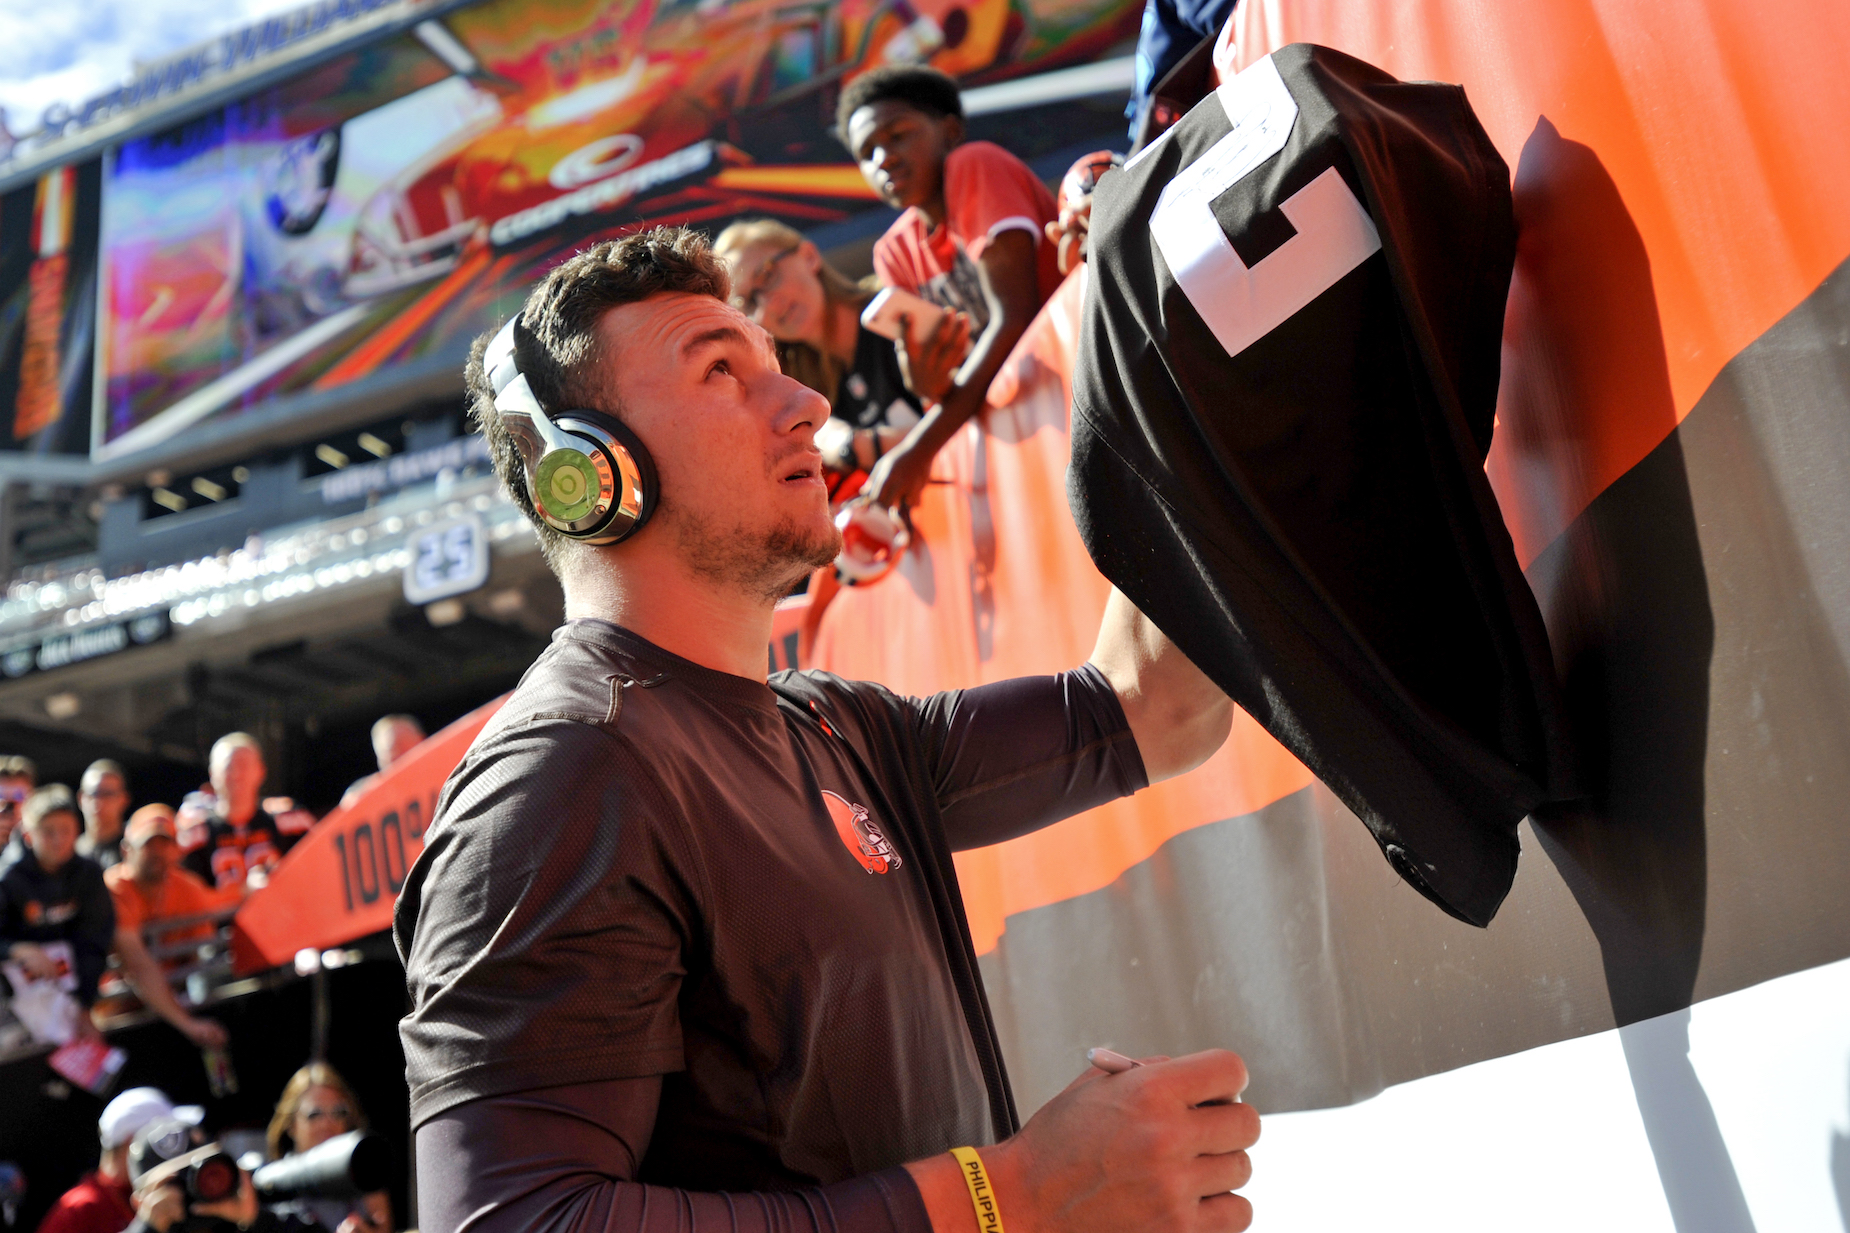 Johnny Manziel signed plenty of autographs in his day, including one cursing out Darren Rovell.